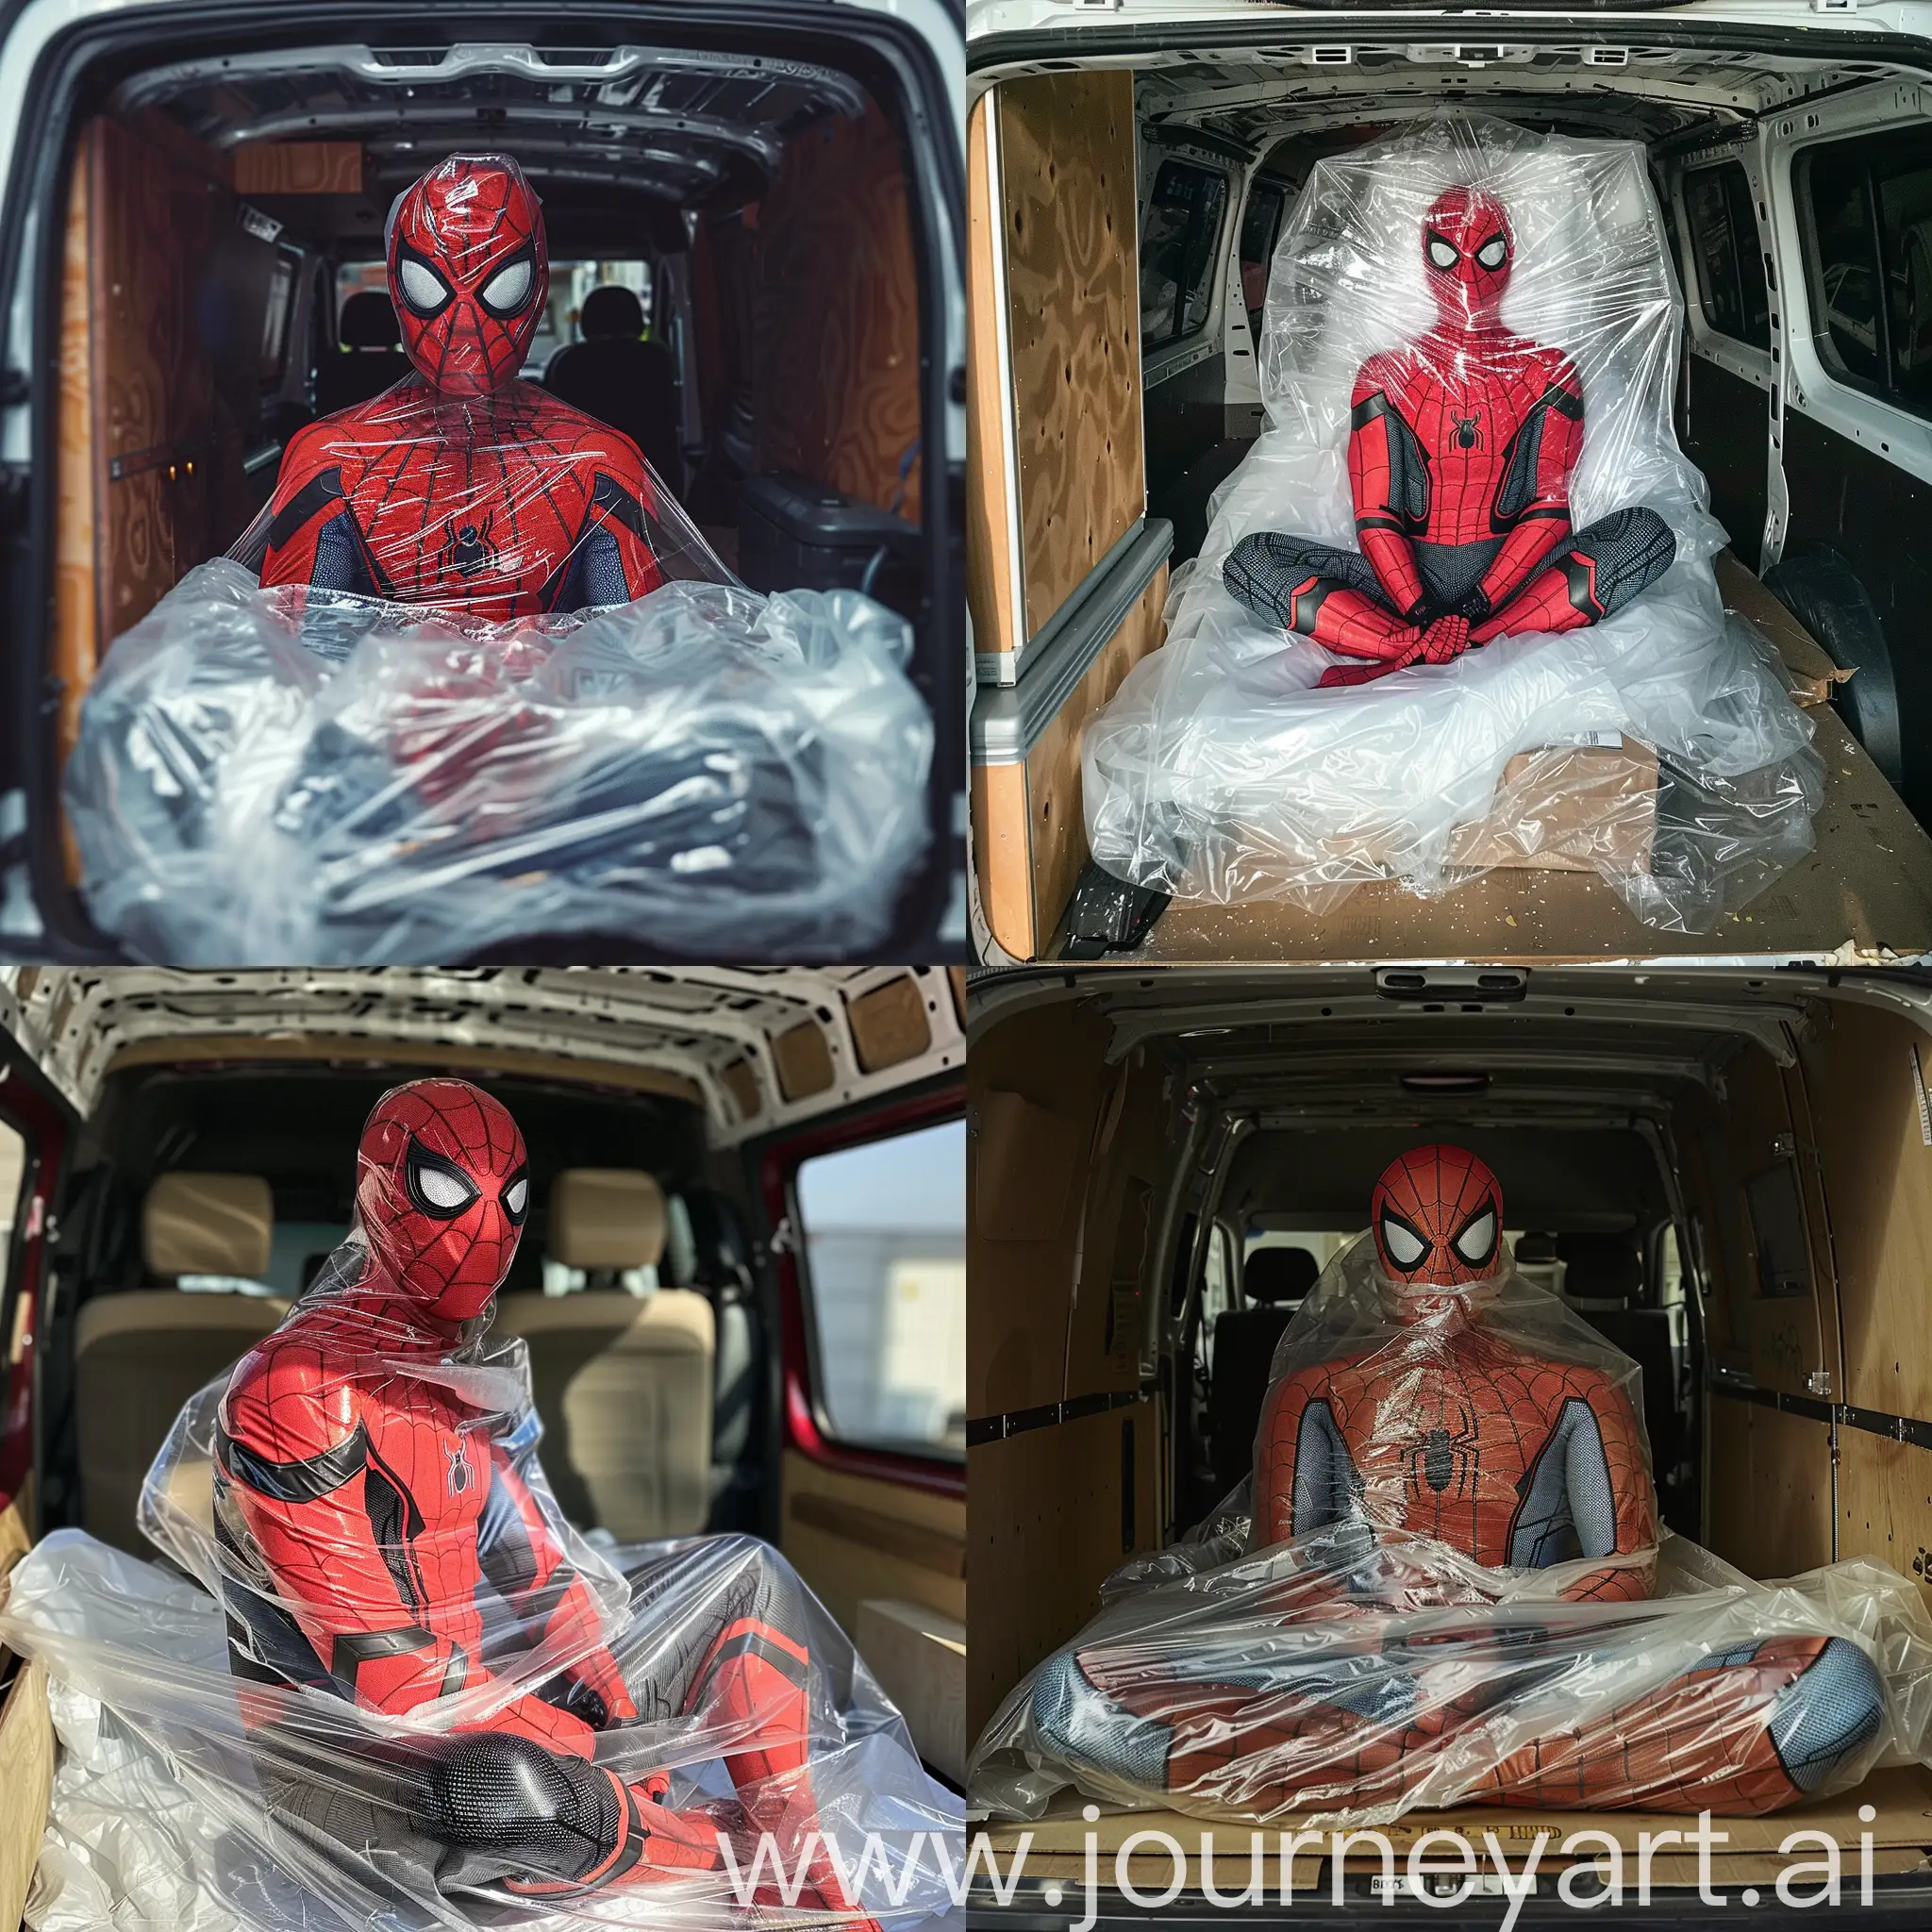 spiderman wrapped in plastic wrap in the back of a van